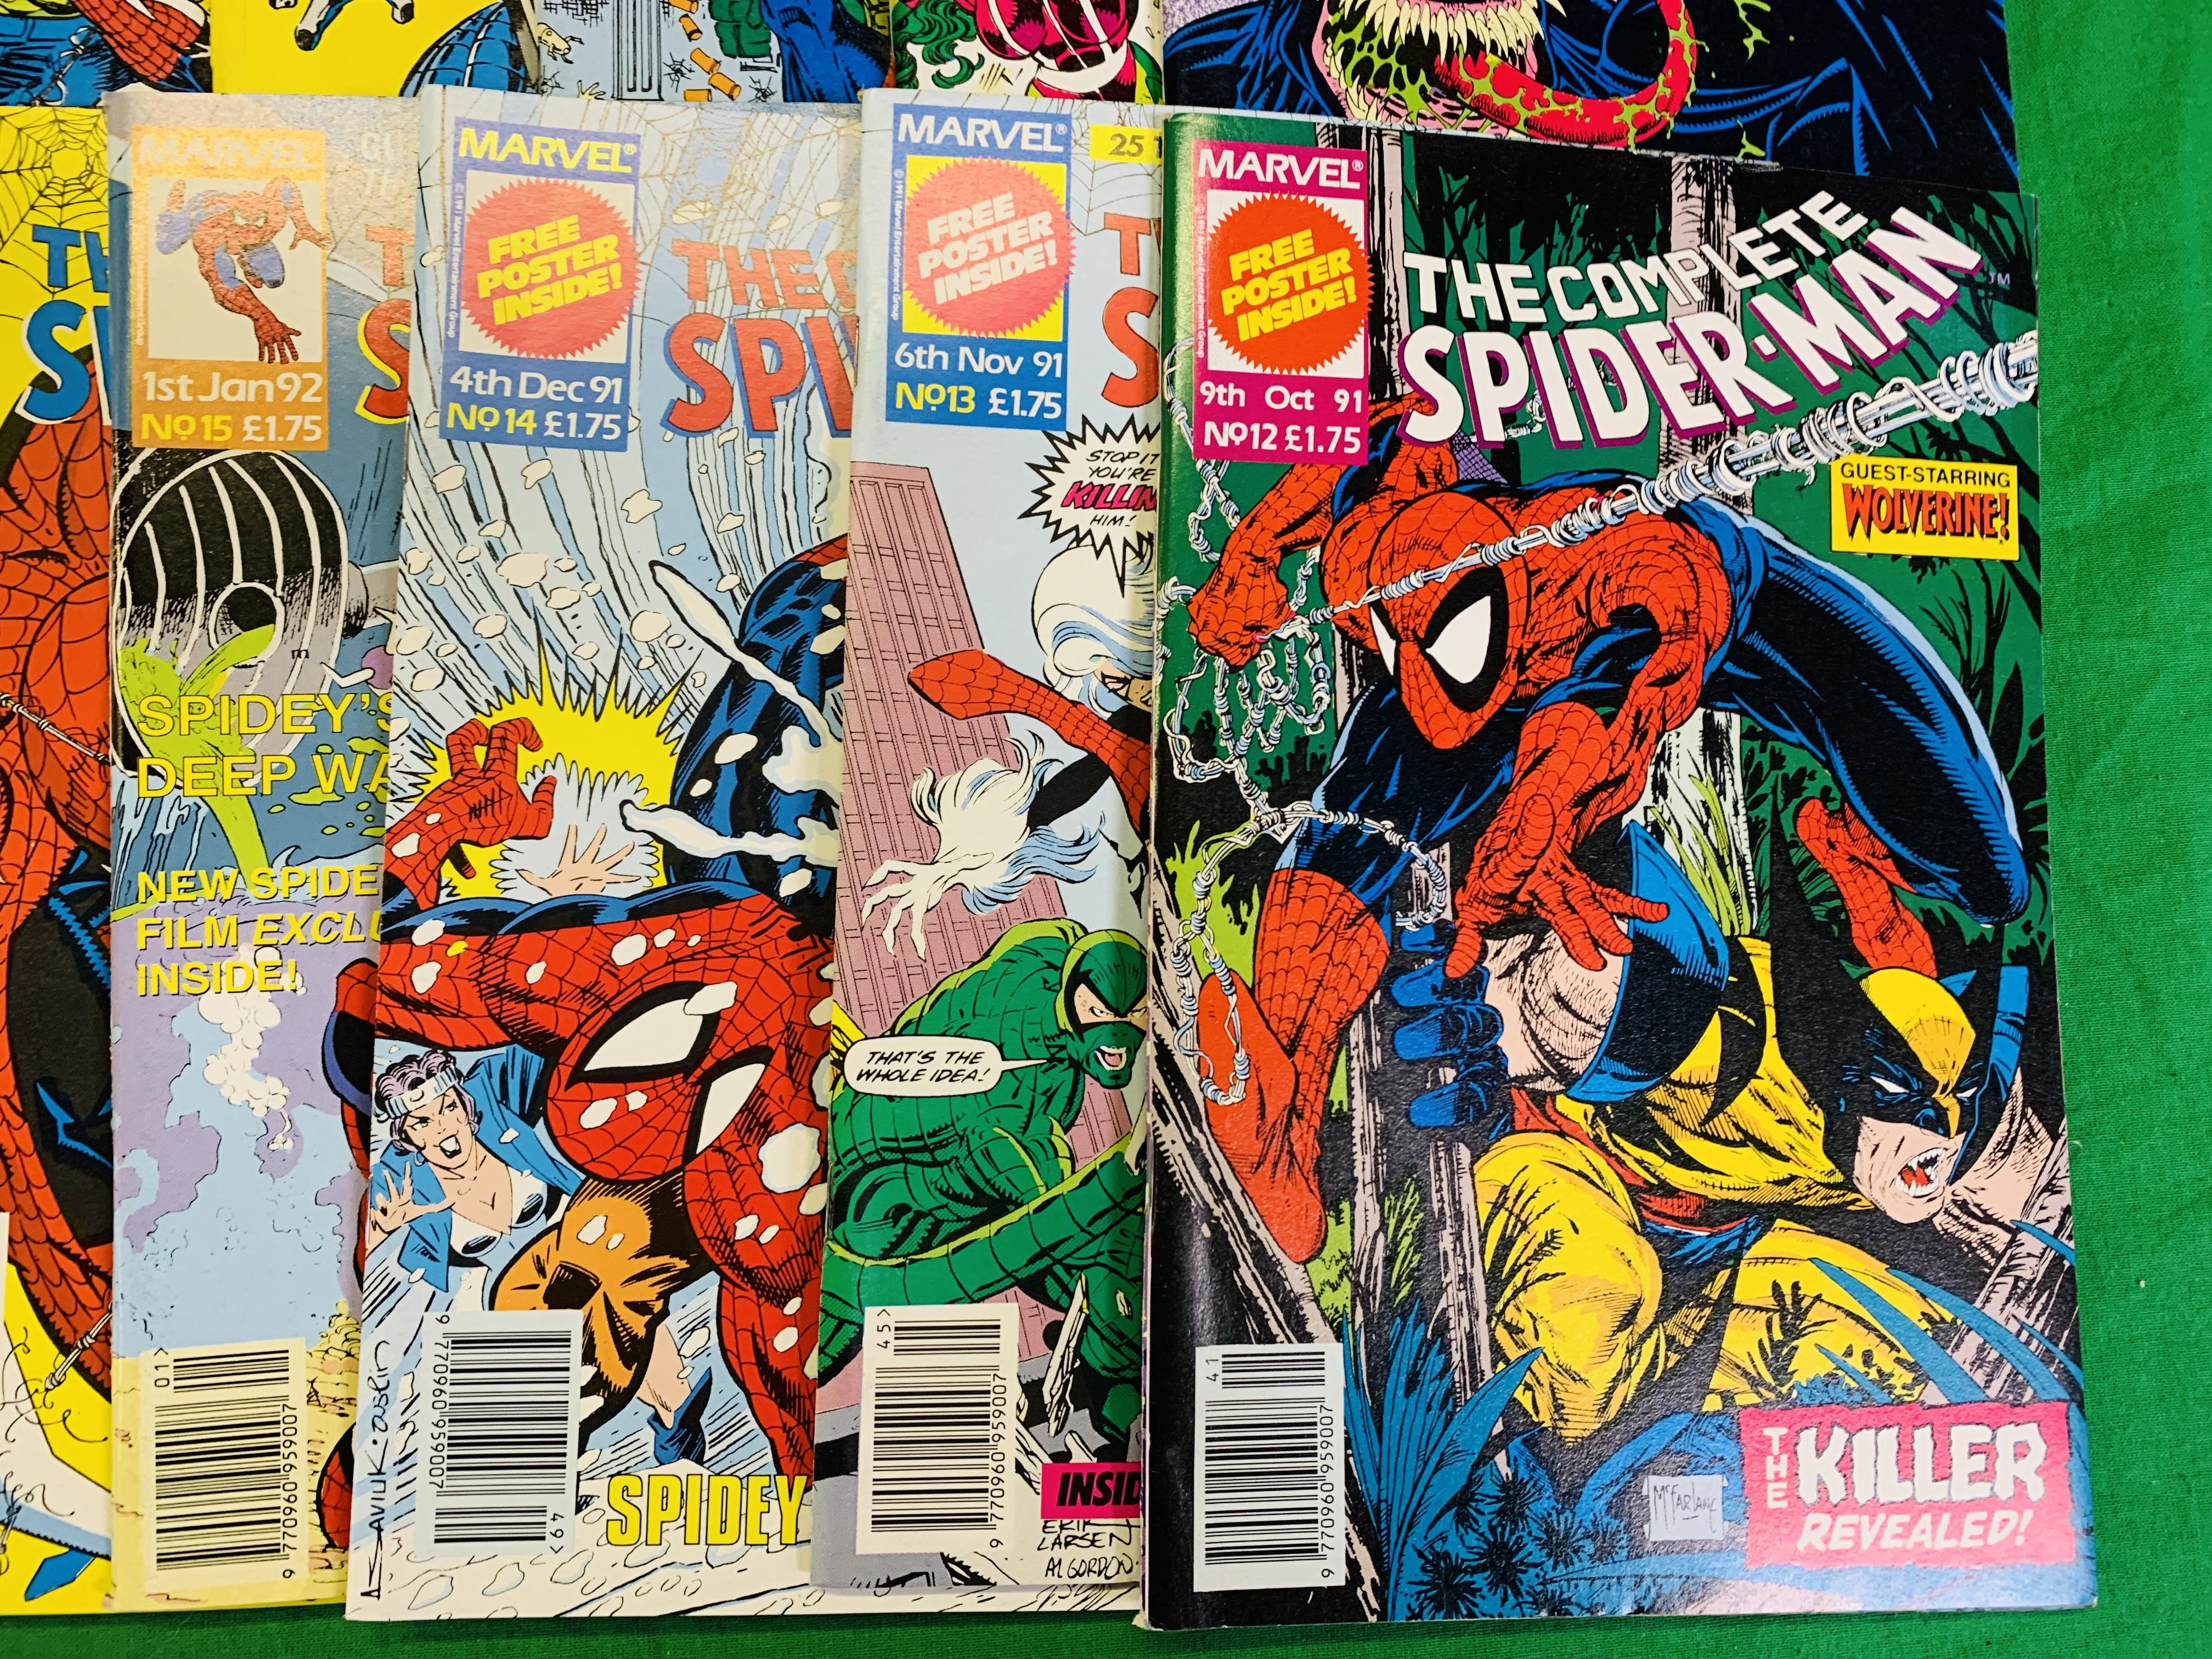 MARVEL COMICS THE COMPLETE SPIDERMAN NO. 1 - 24 FROM 1990. NO. 1 COMPLETE WITH FREE GIFT. NO. - Image 7 of 10